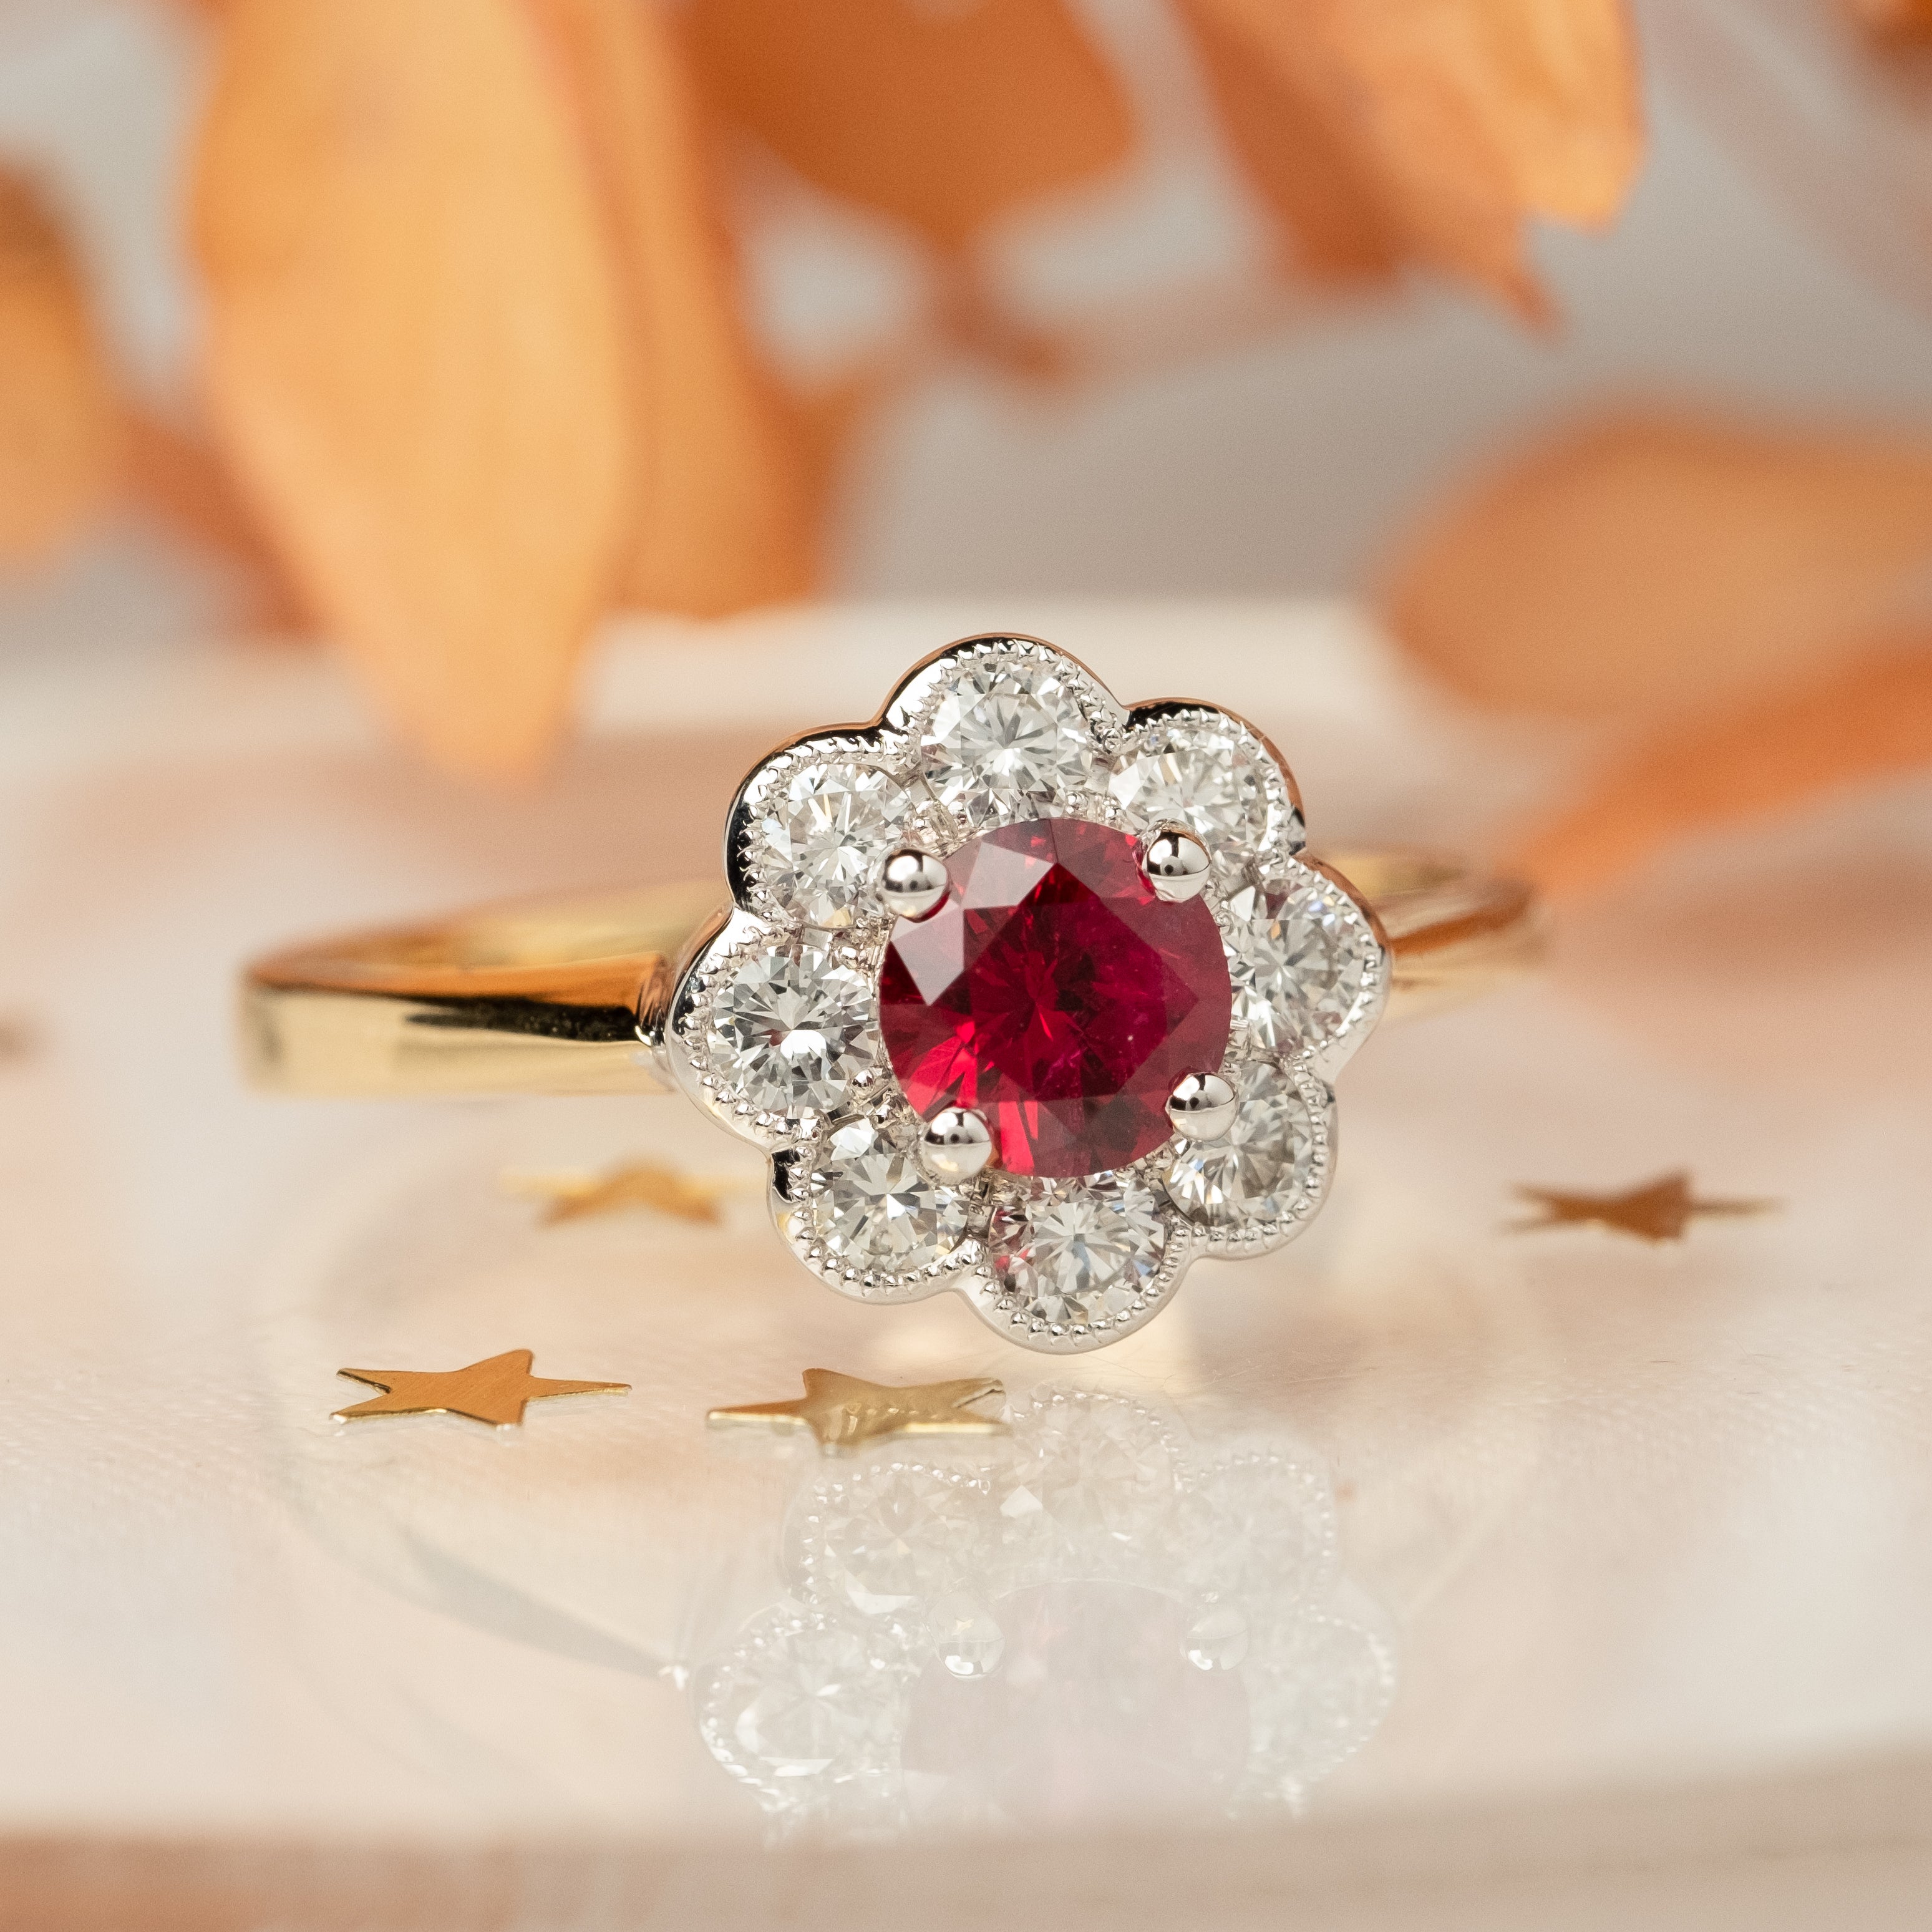 Vintage style ring with a ruby surrounded by a diamond daisy cluster